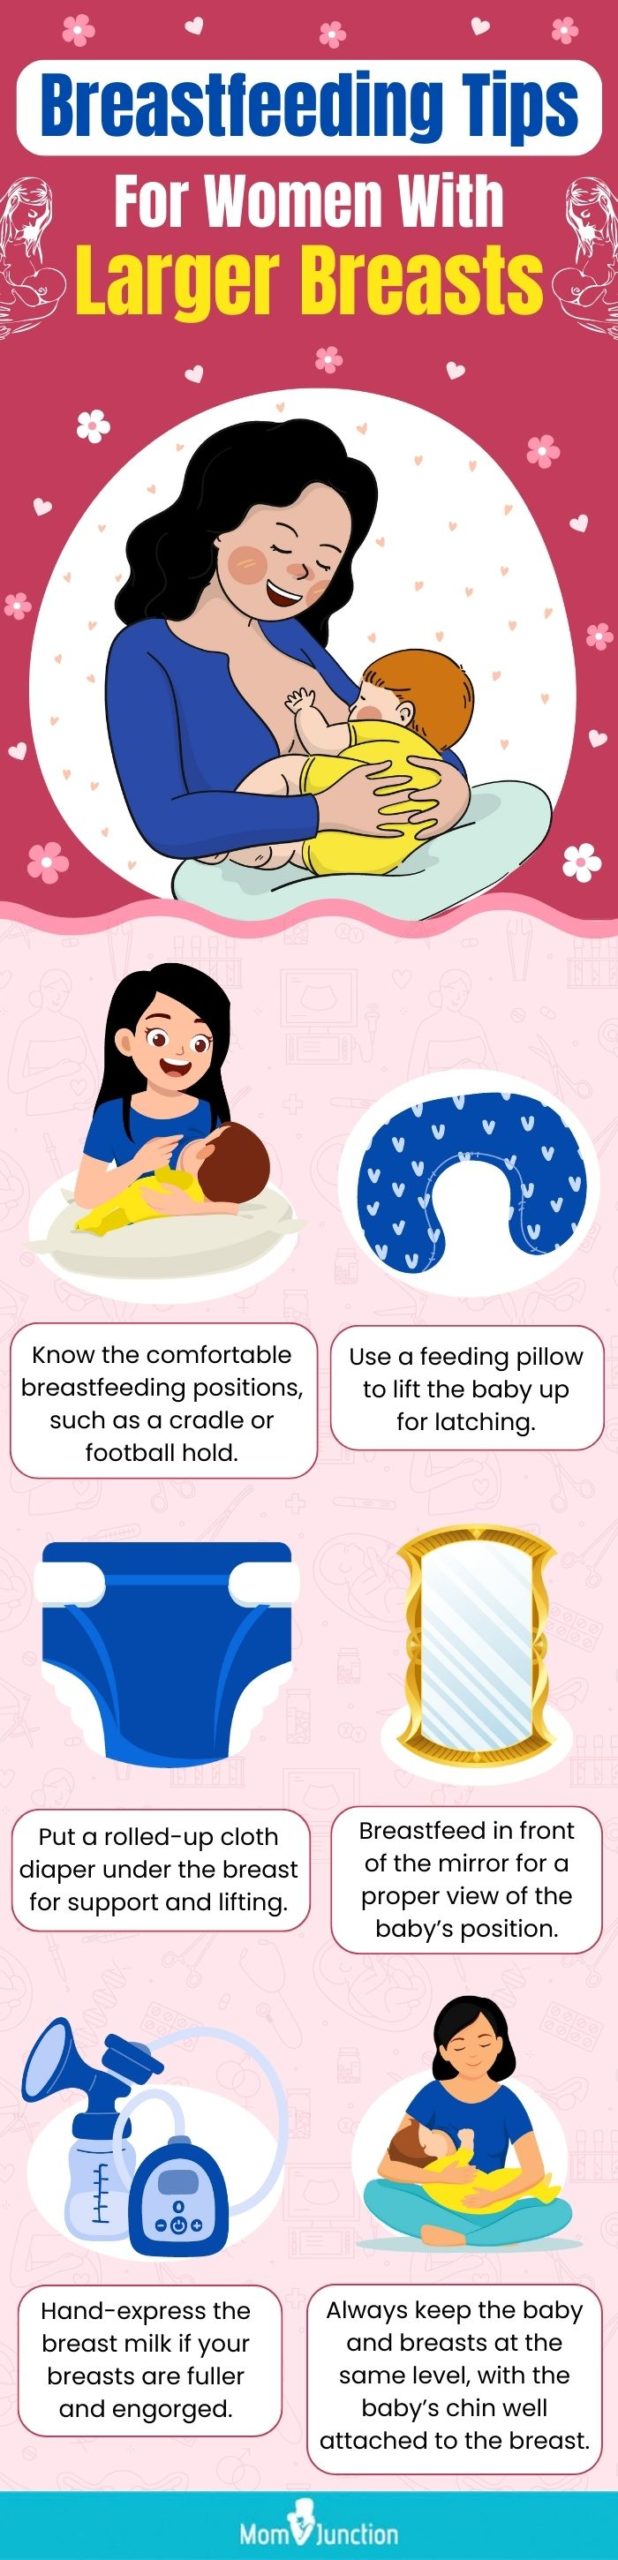 11 Tips For Breastfeeding With Big Breasts And Suitable Positions